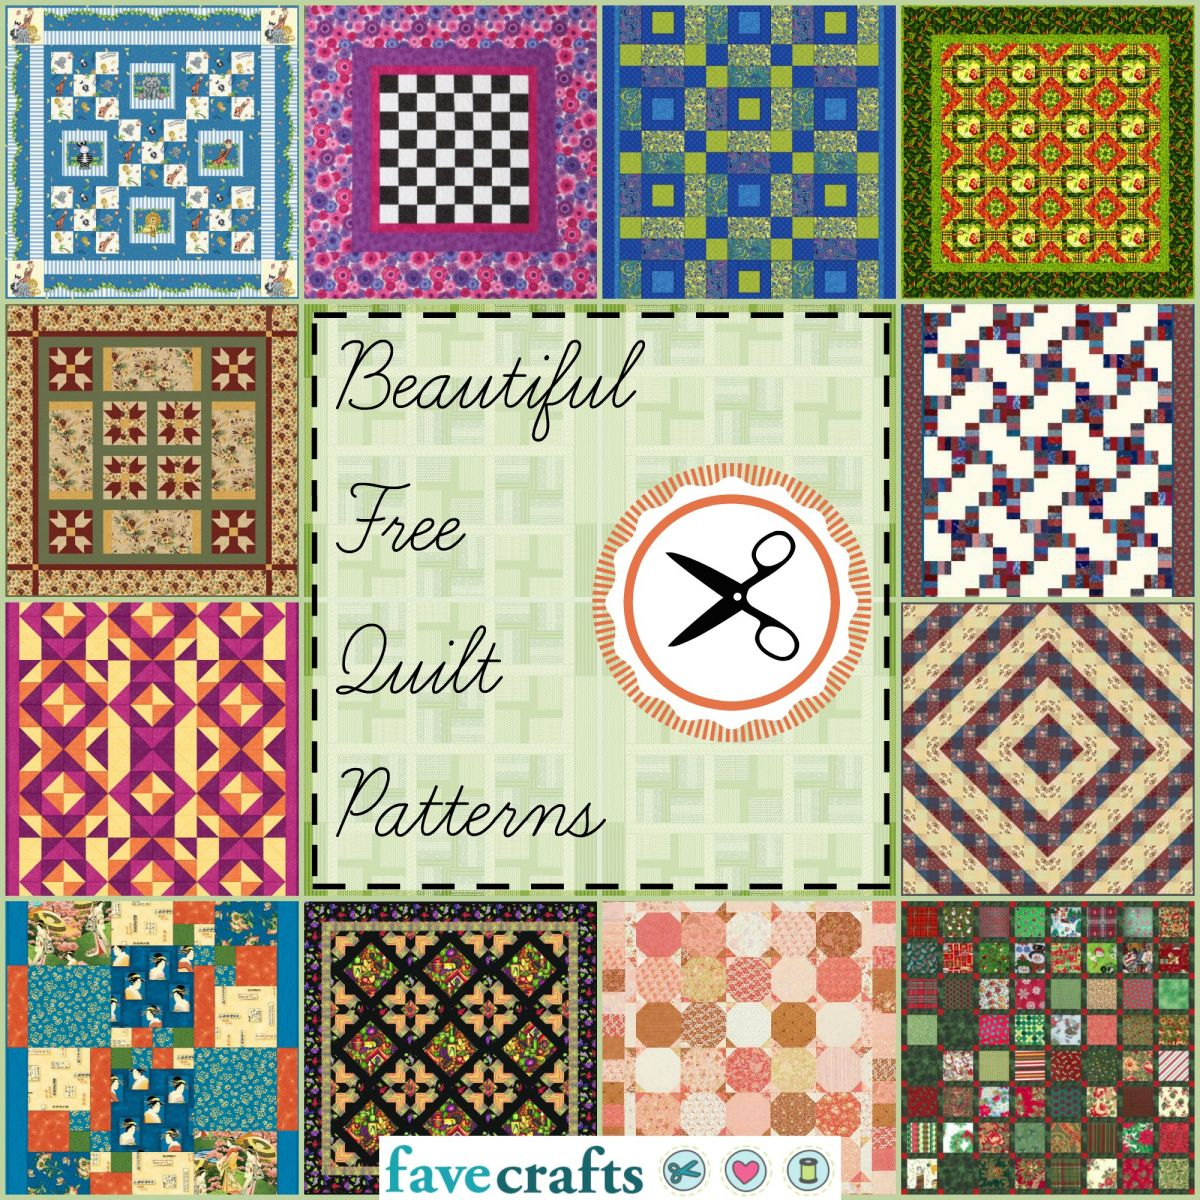 Japanese Embroidery Patterns Free 38 Free Quilt Patterns Favecrafts